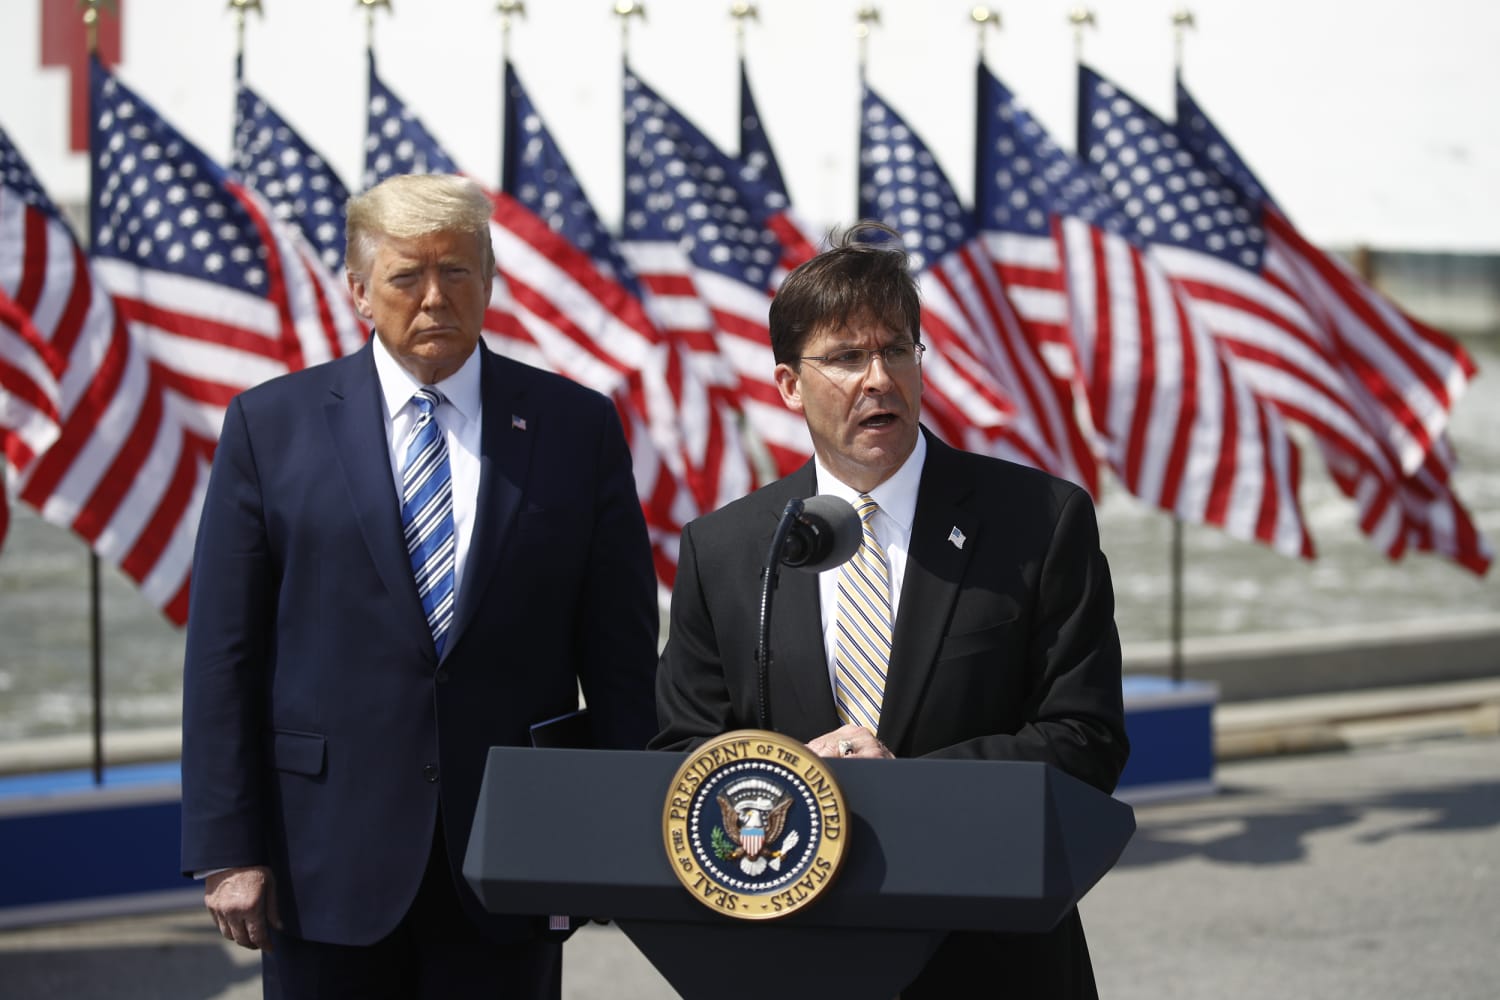 According to ex-Secretary of Defense Mark Esper's new book, Trump suggested shooting racial justice protesters in the legs.